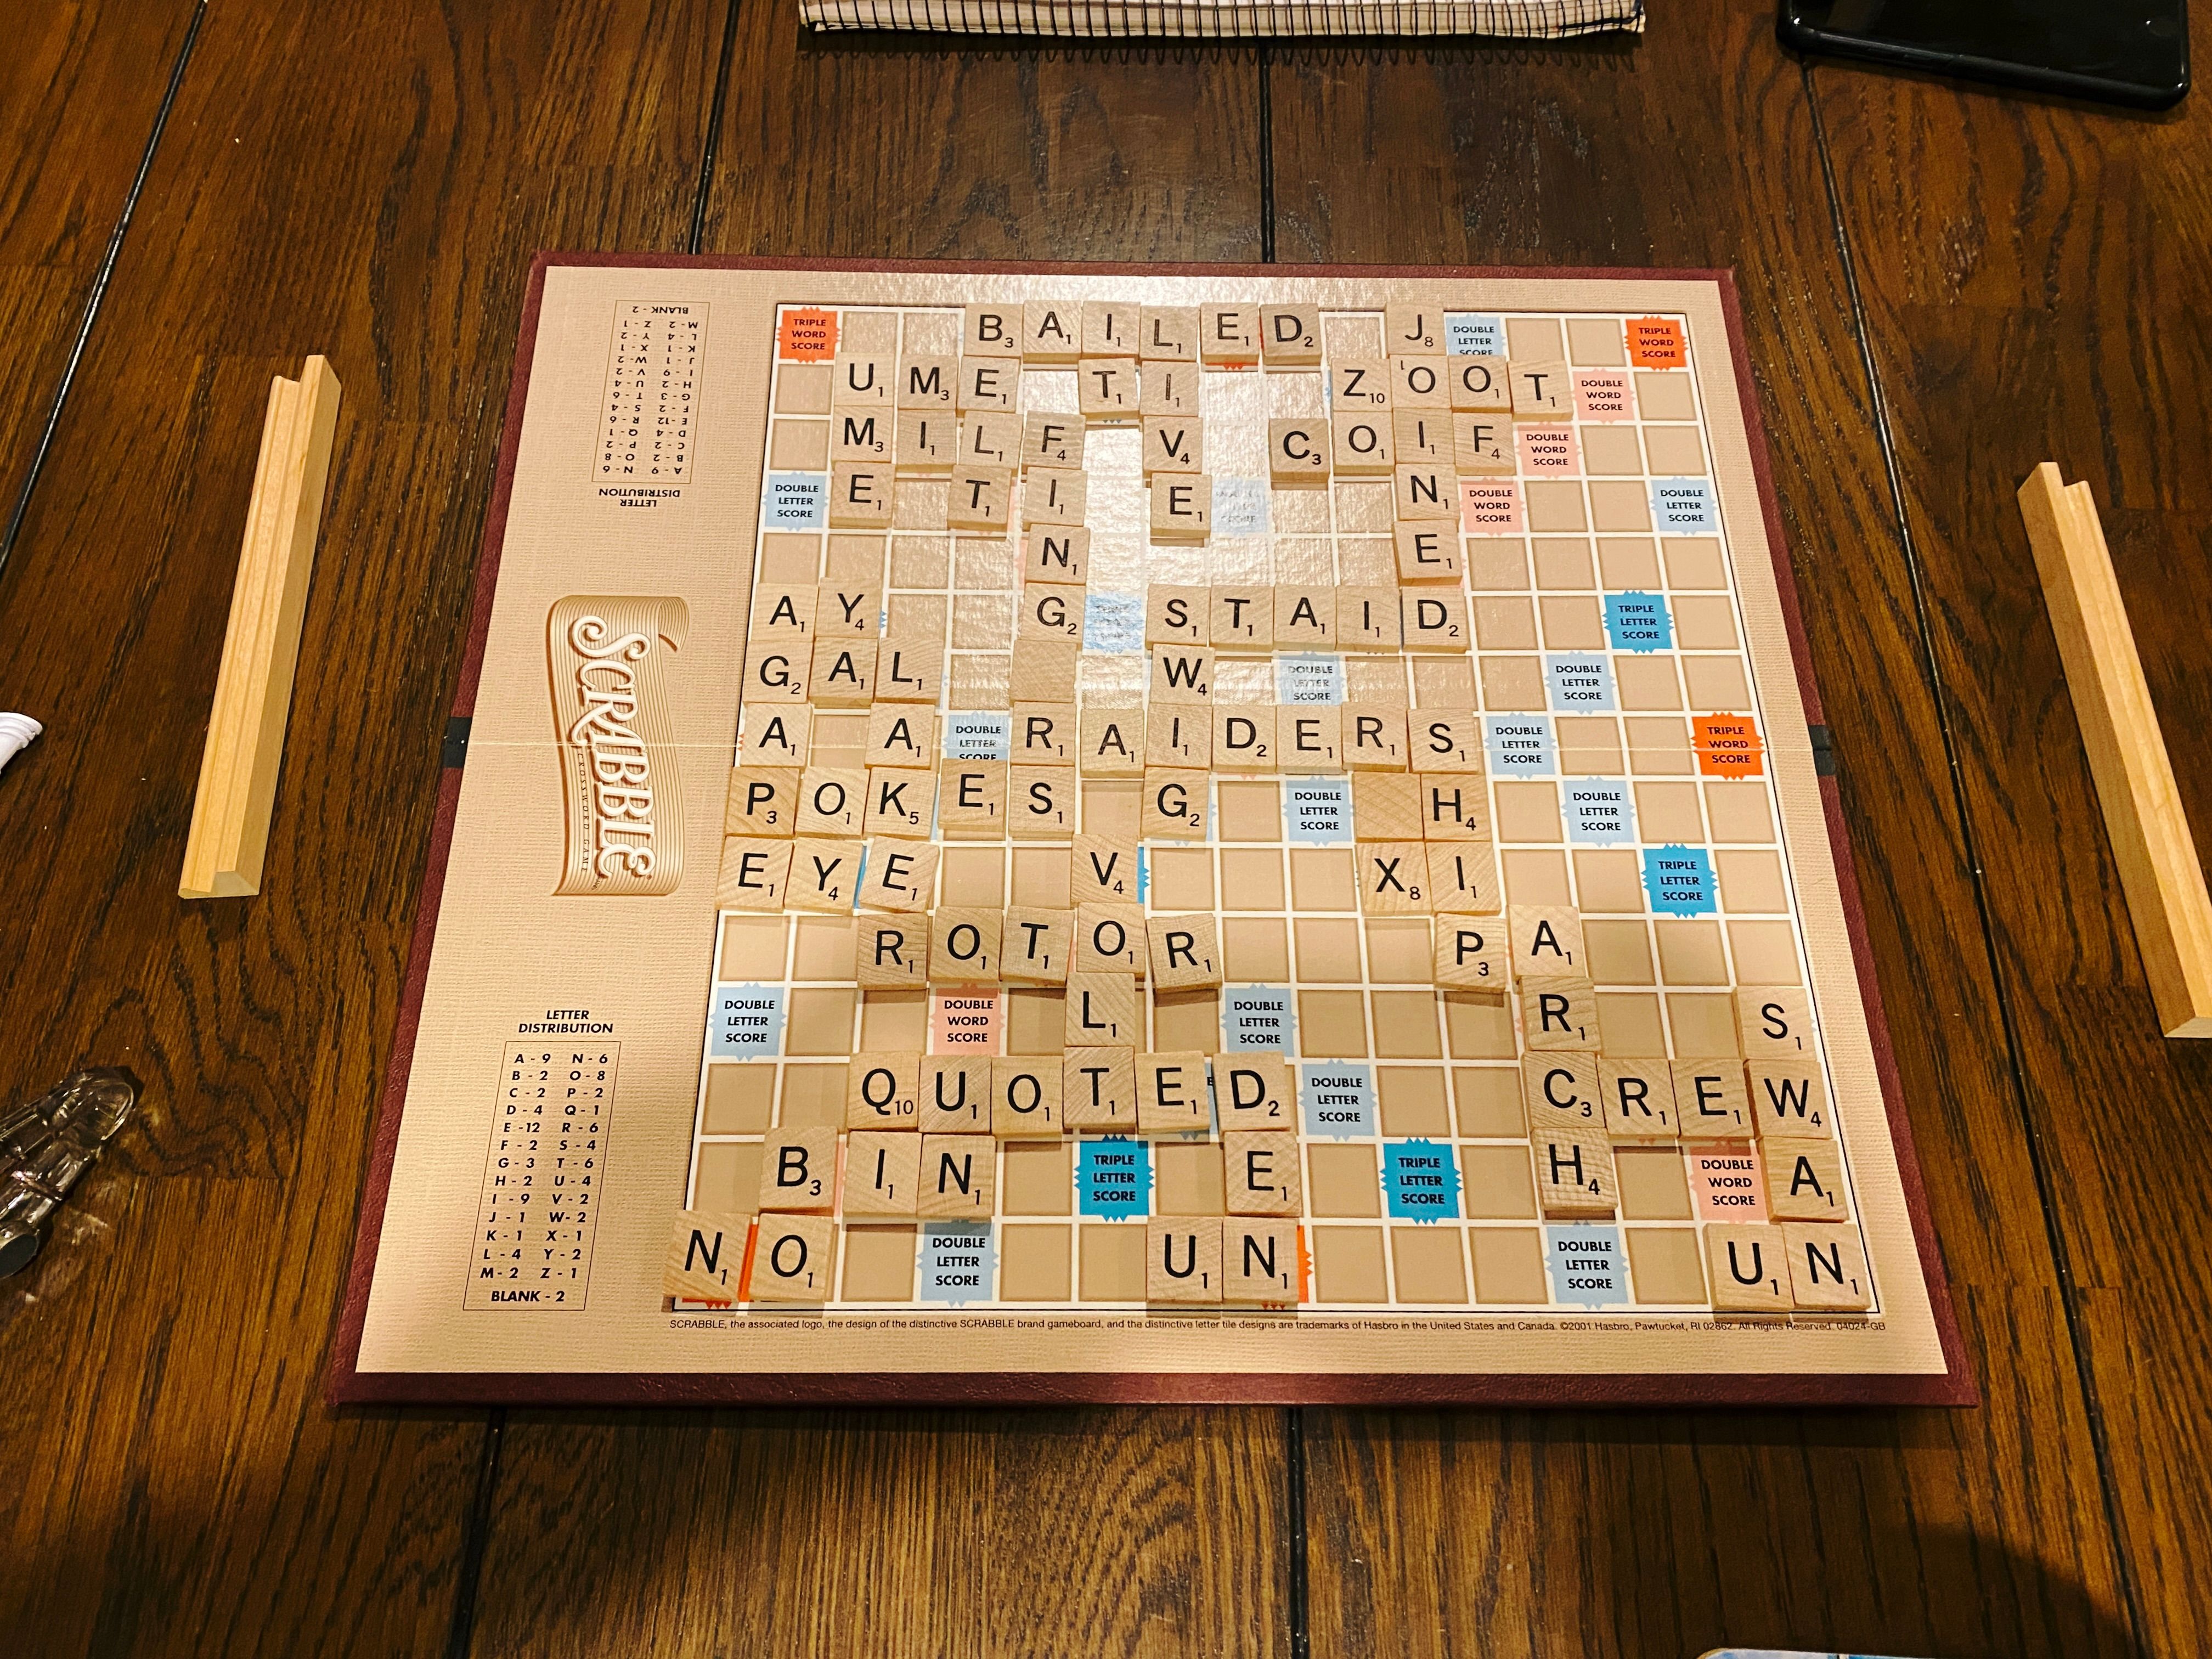 A photo of a completed game of Scrabble.